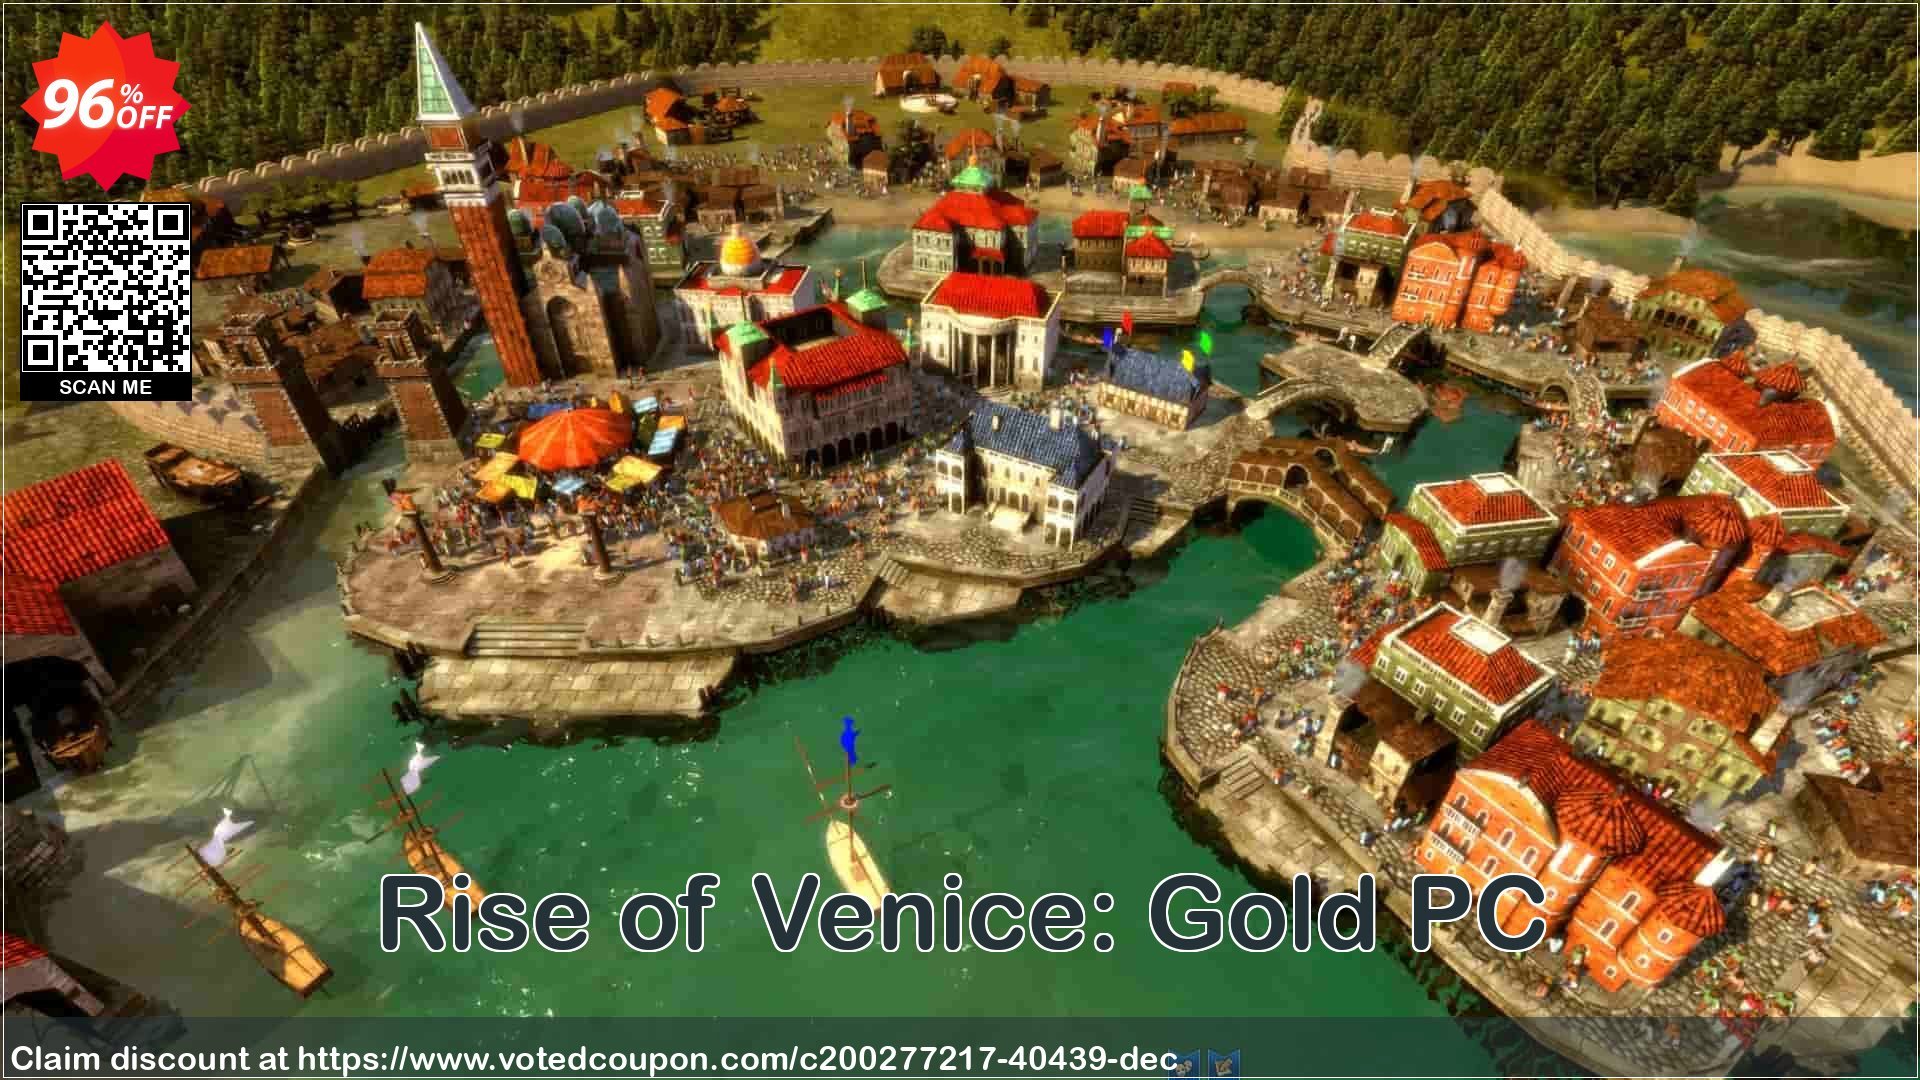 Rise of Venice: Gold PC Coupon Code May 2024, 96% OFF - VotedCoupon